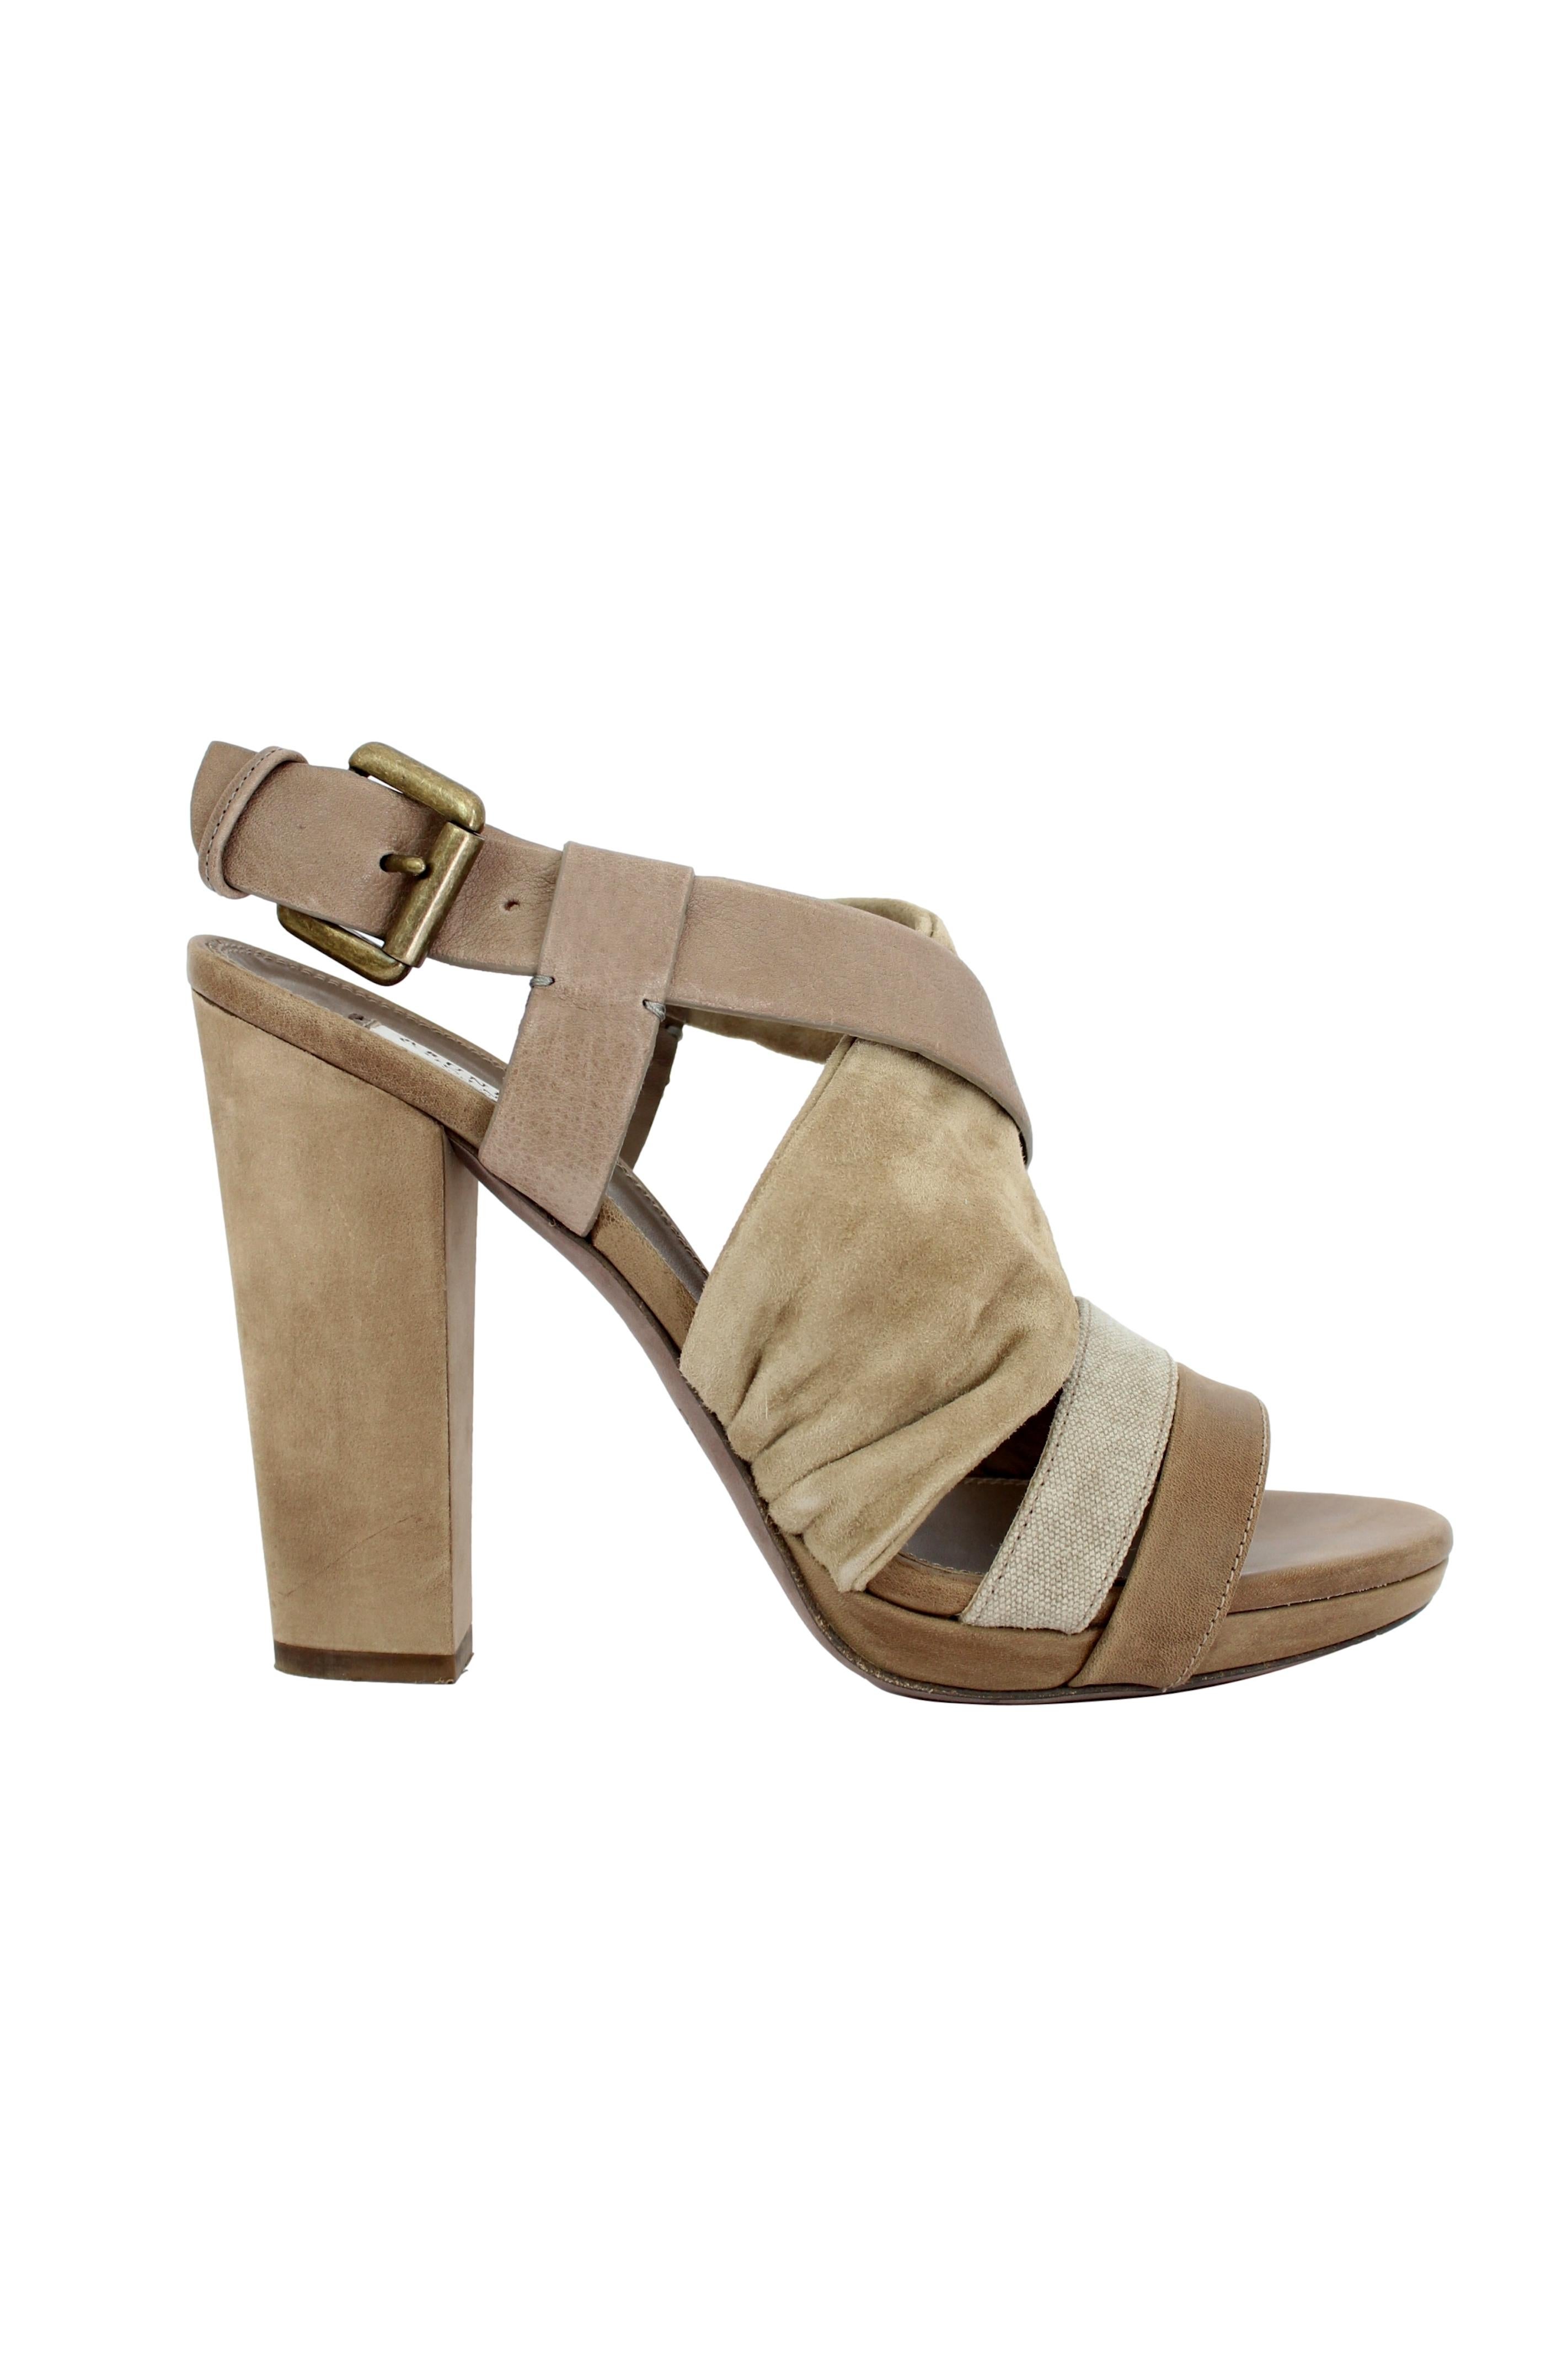 Beige leather sandals with heel by the designer Brunello Cucinelli. Double band on the instep in suede leather with adjustable buckle. The heel is 4.5